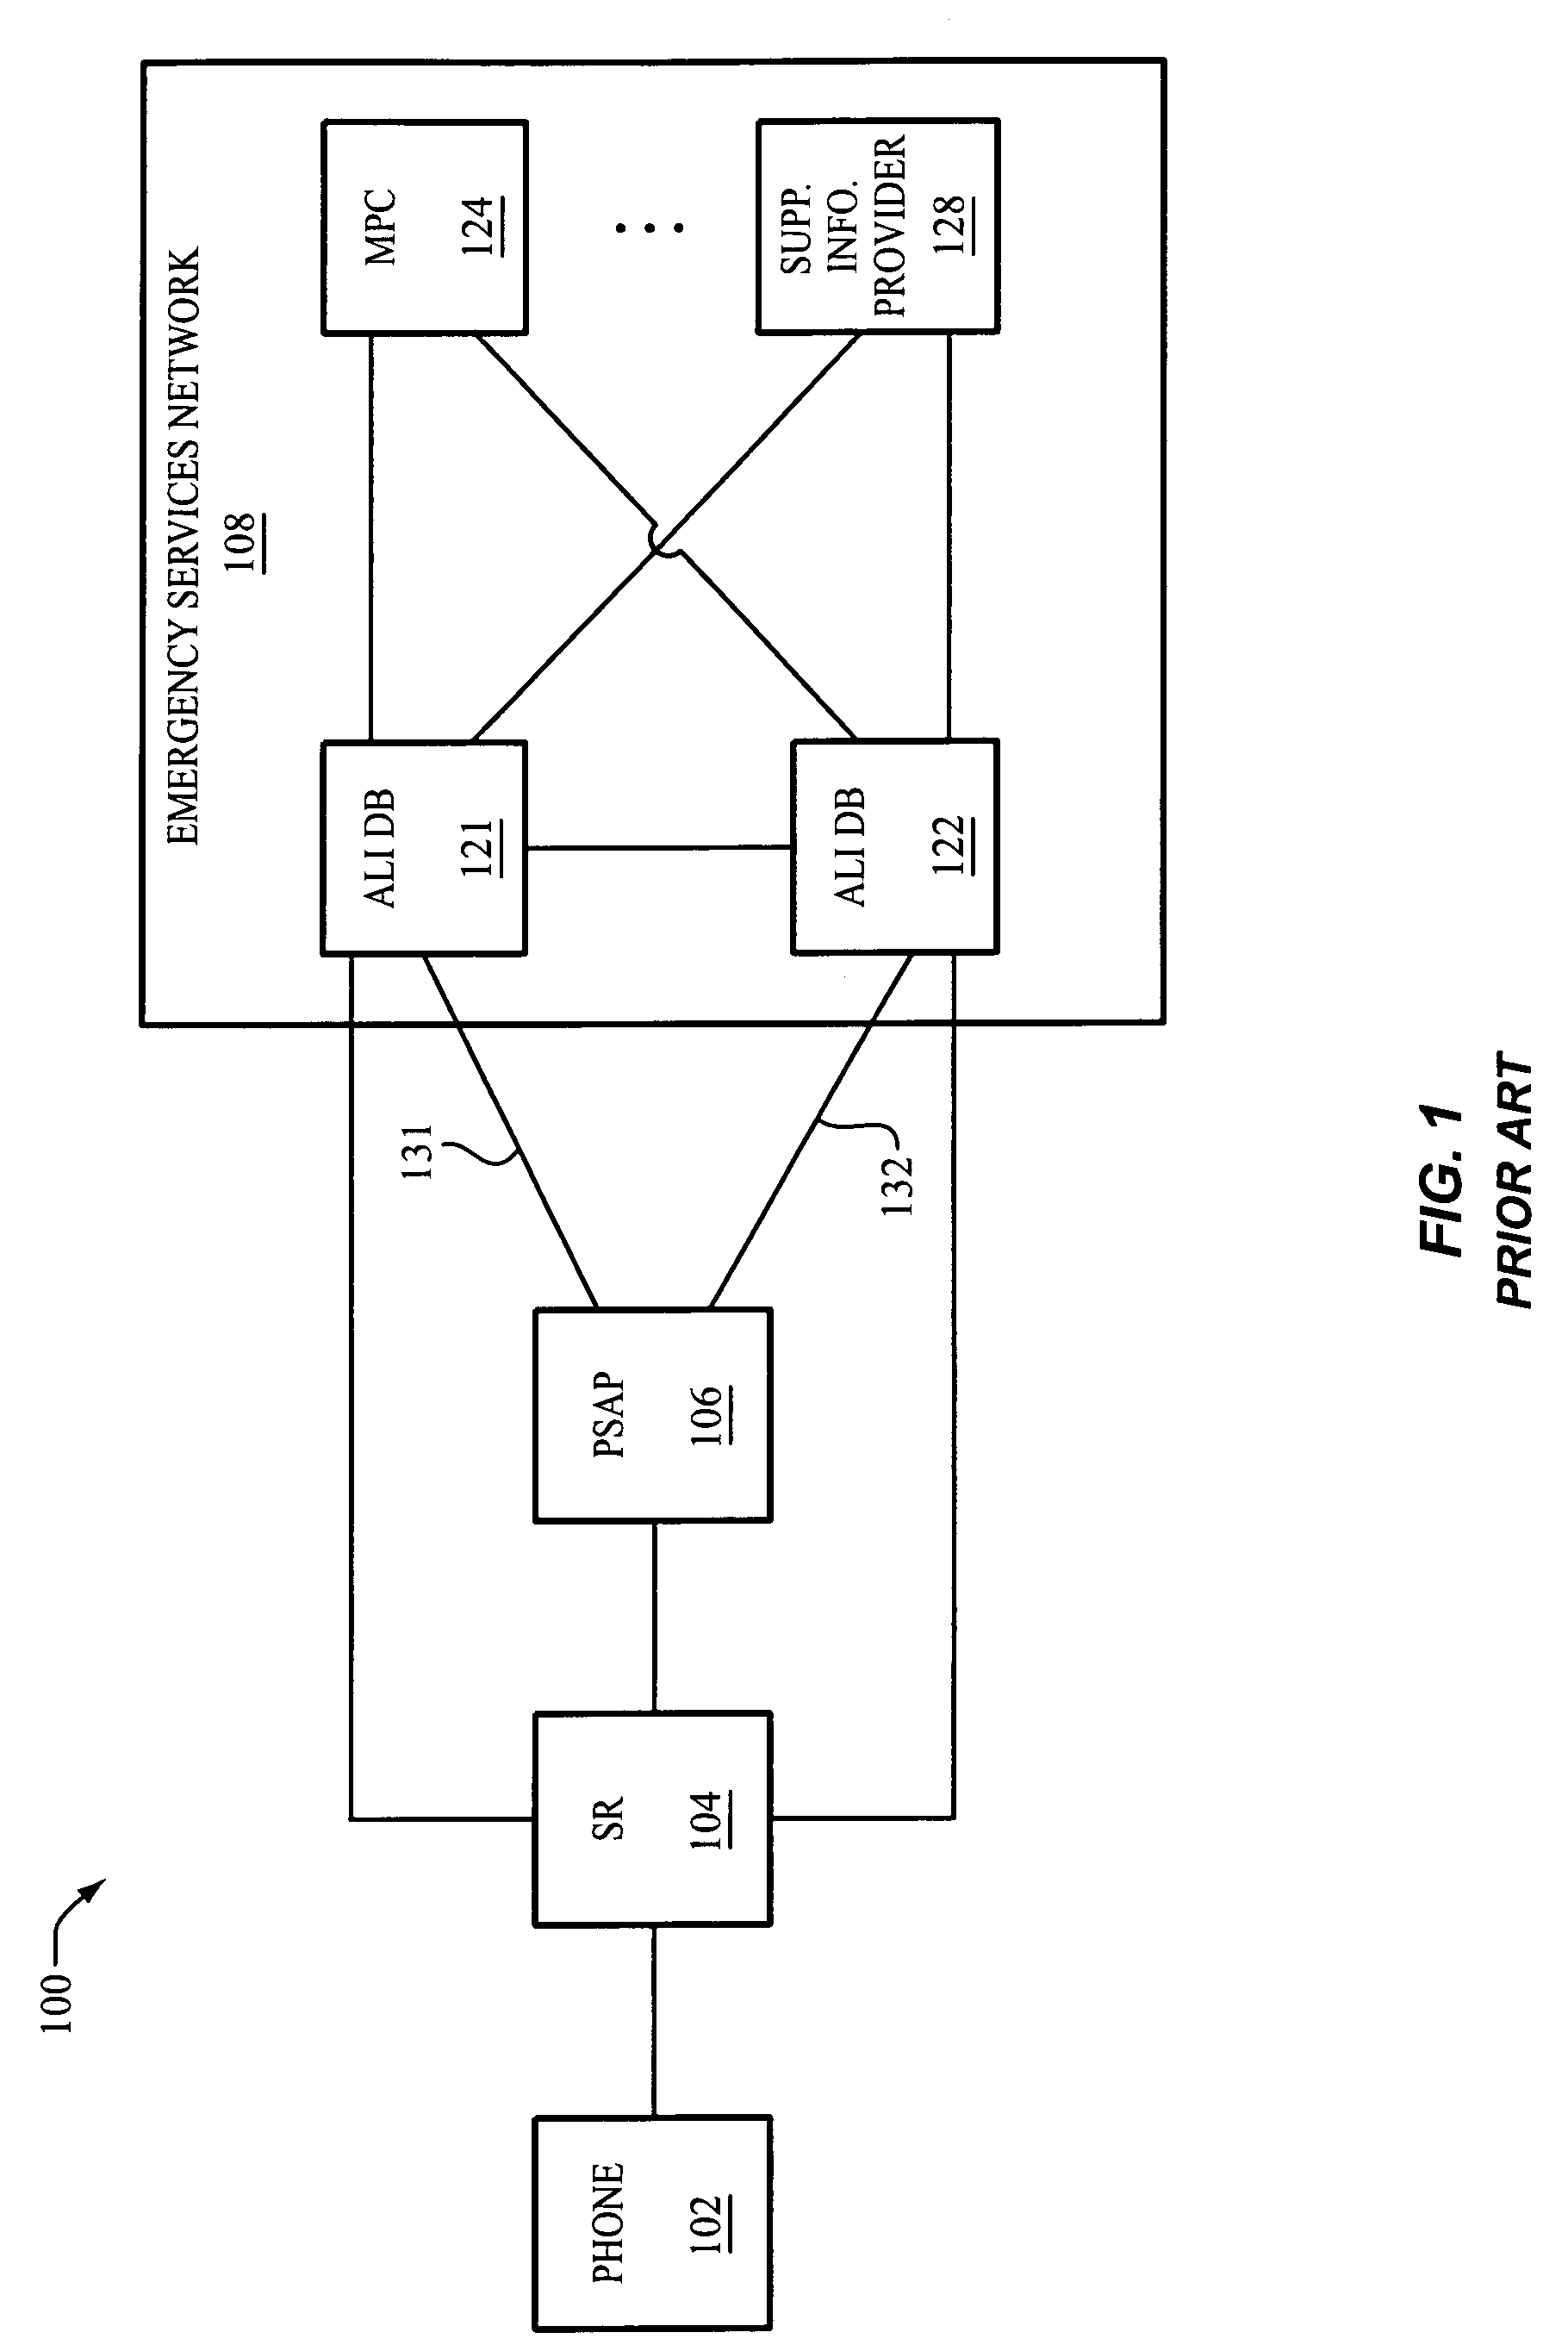 Method and apparatus for increasing the reliability of an emergency call communication network